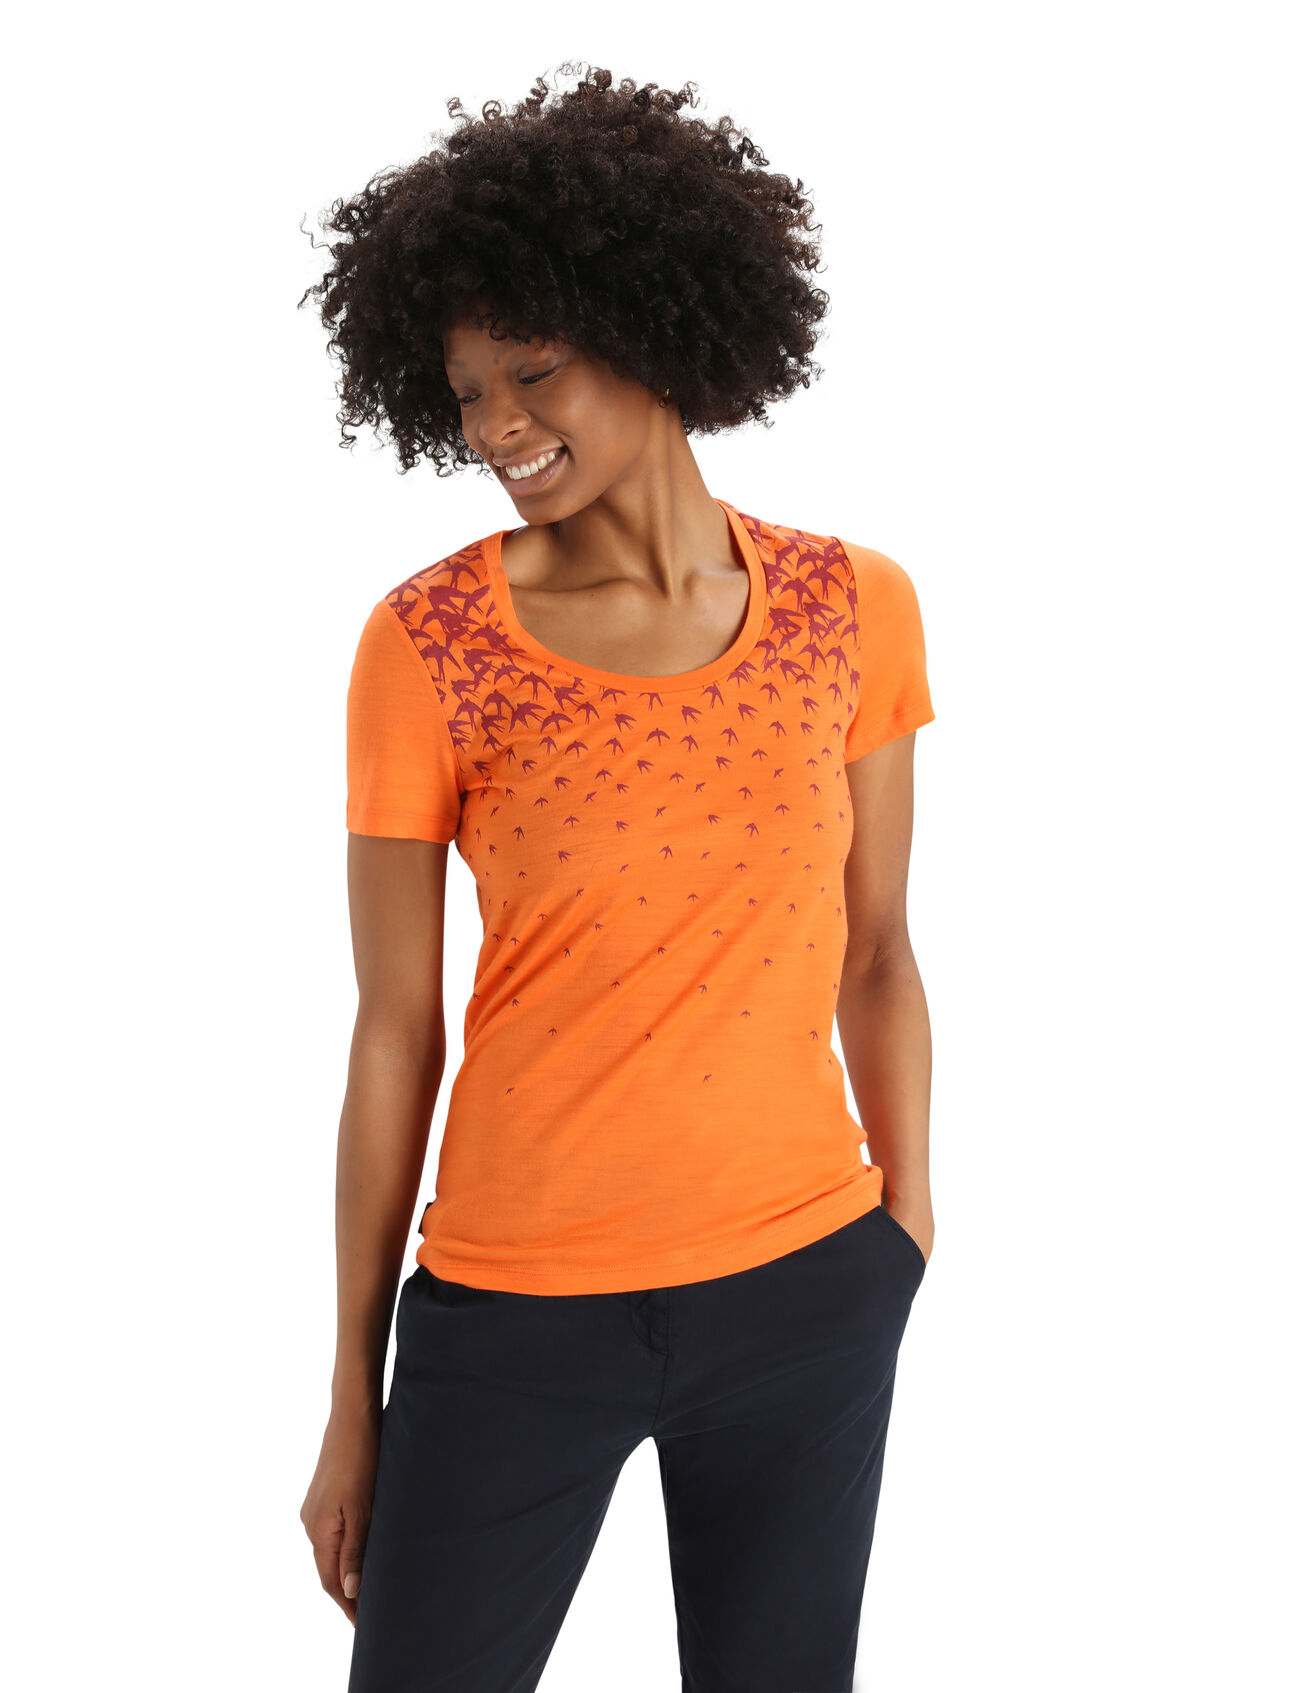 Womens Merino Tech Lite II Short Sleeve Scoop T-Shirt Migration Our versatile tech tee that provides comfort, breathability and natural odor-resistance for any adventure you can think of, the Tech Lite II Short Sleeve Scoop Tee Migration features 100% merino for all-natural performance. The footstep graphic print reminds us that everyone has an impact.